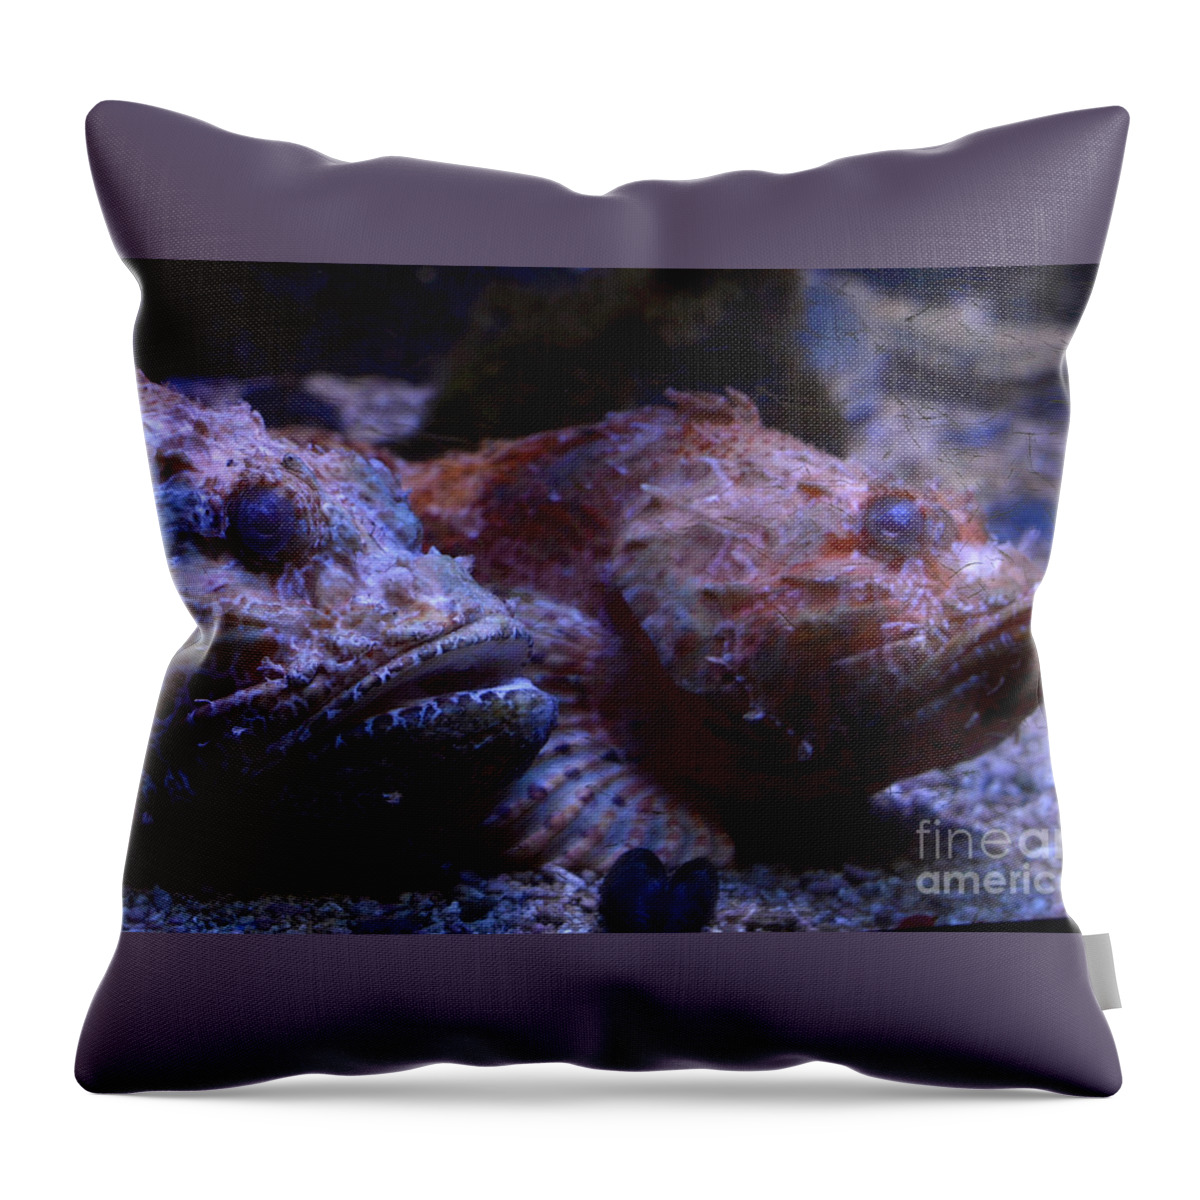 Fish Throw Pillow featuring the digital art Old Friends by Leo Symon